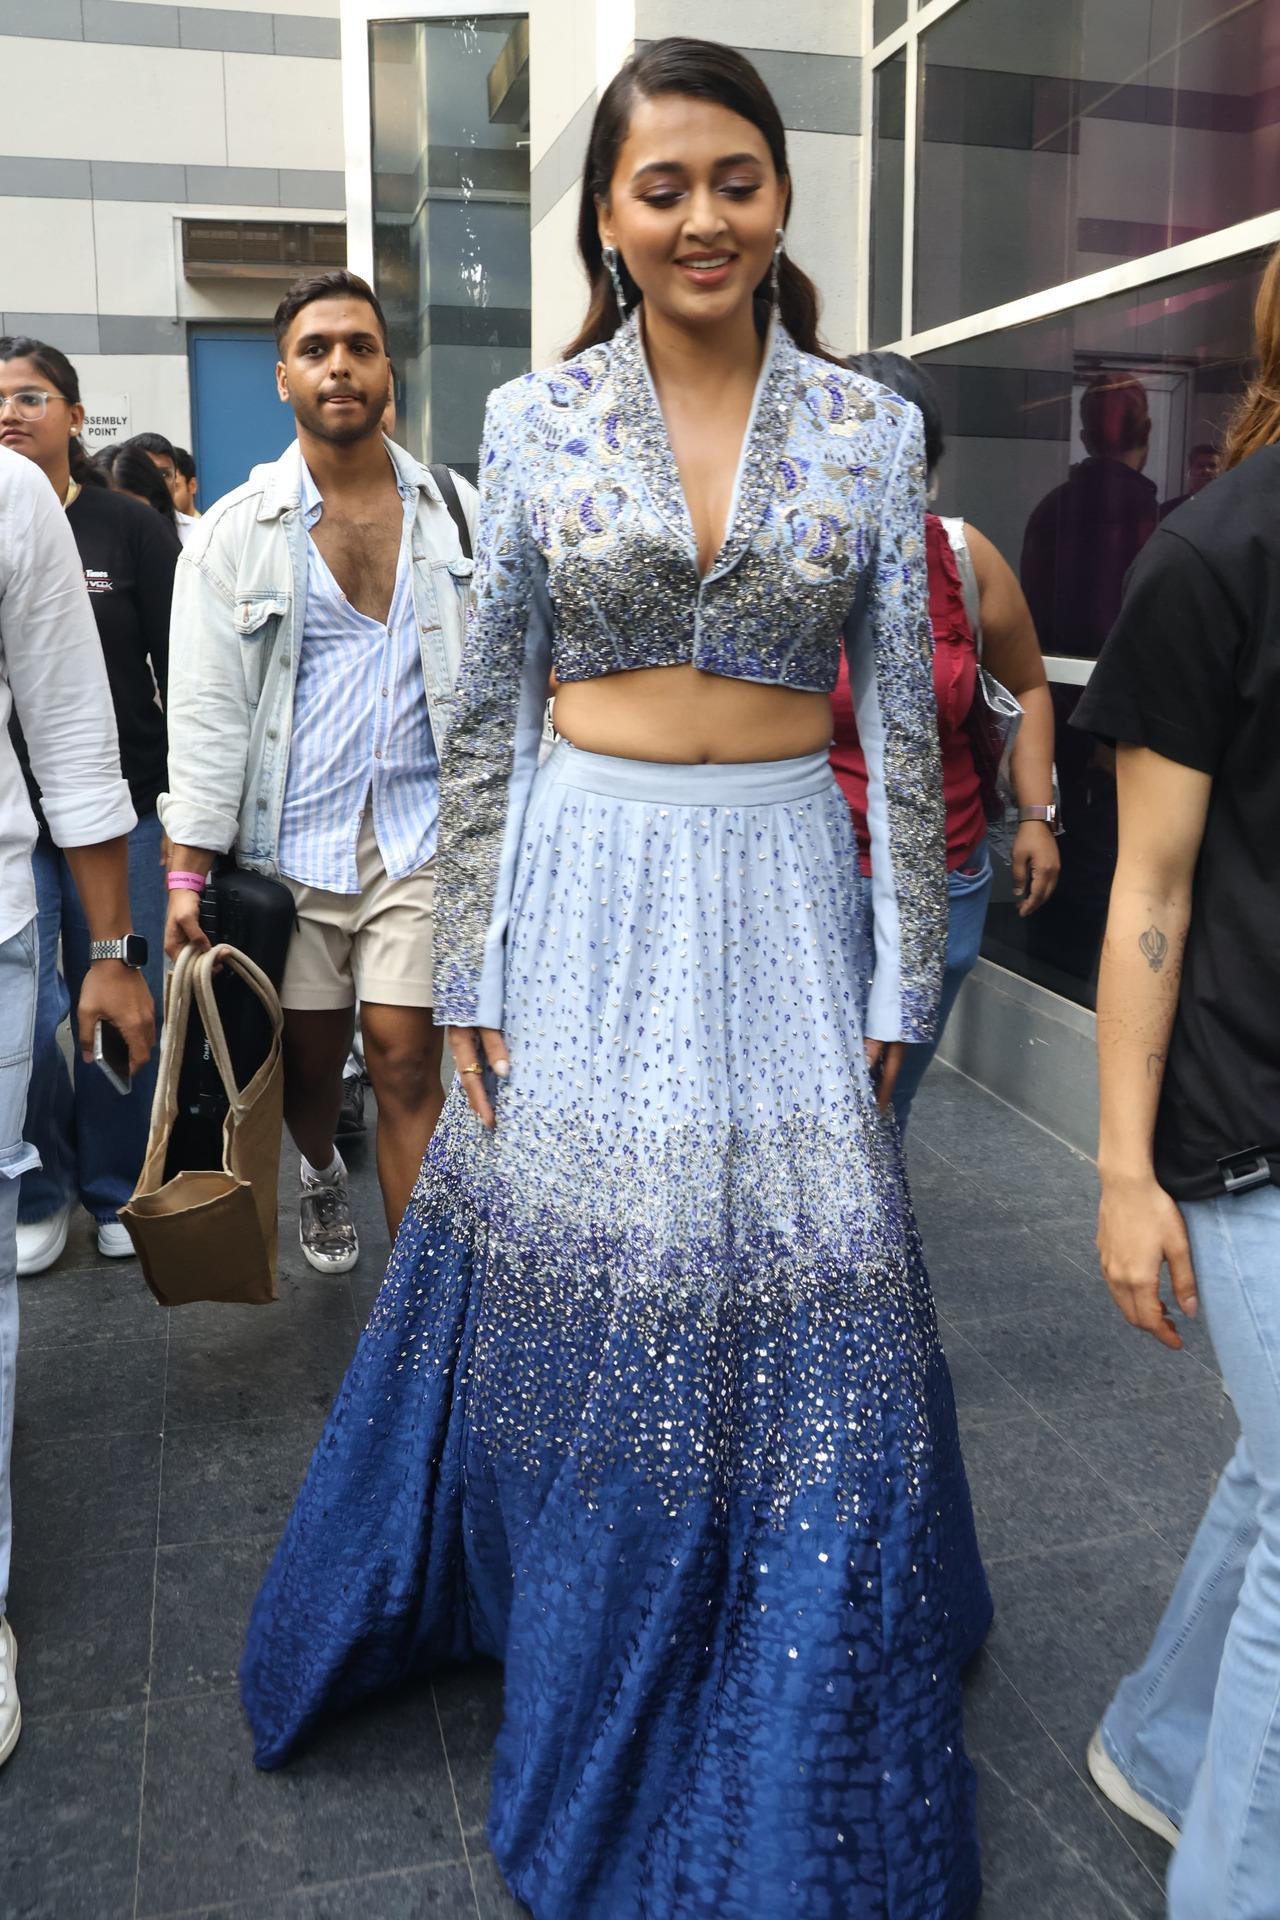 Tejasswi Prakash was glowing in a blue lehenga as she got popped after a shoot in the city